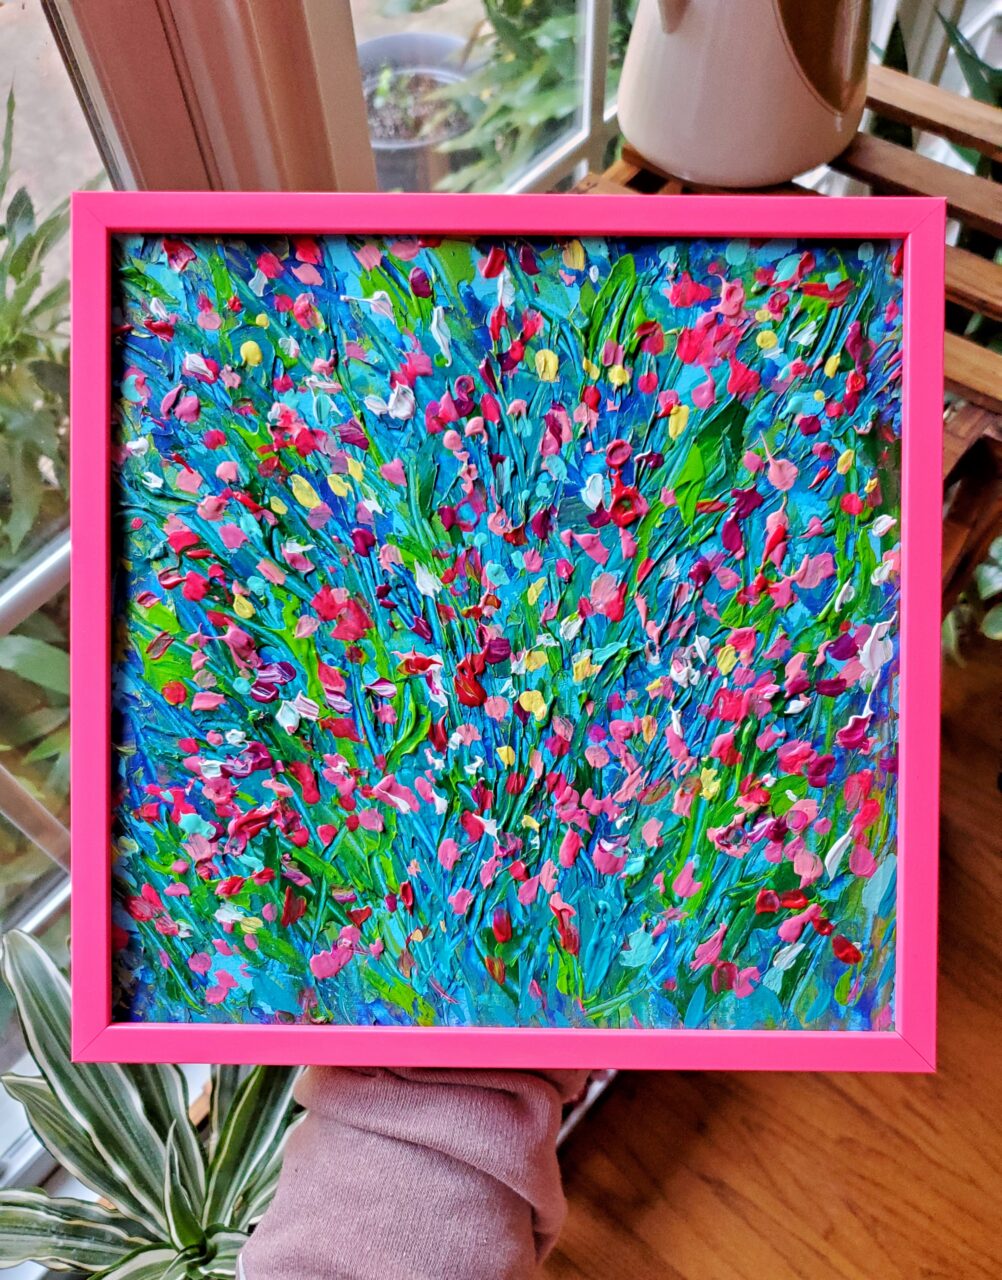 Bright pink frame with colorful art. 